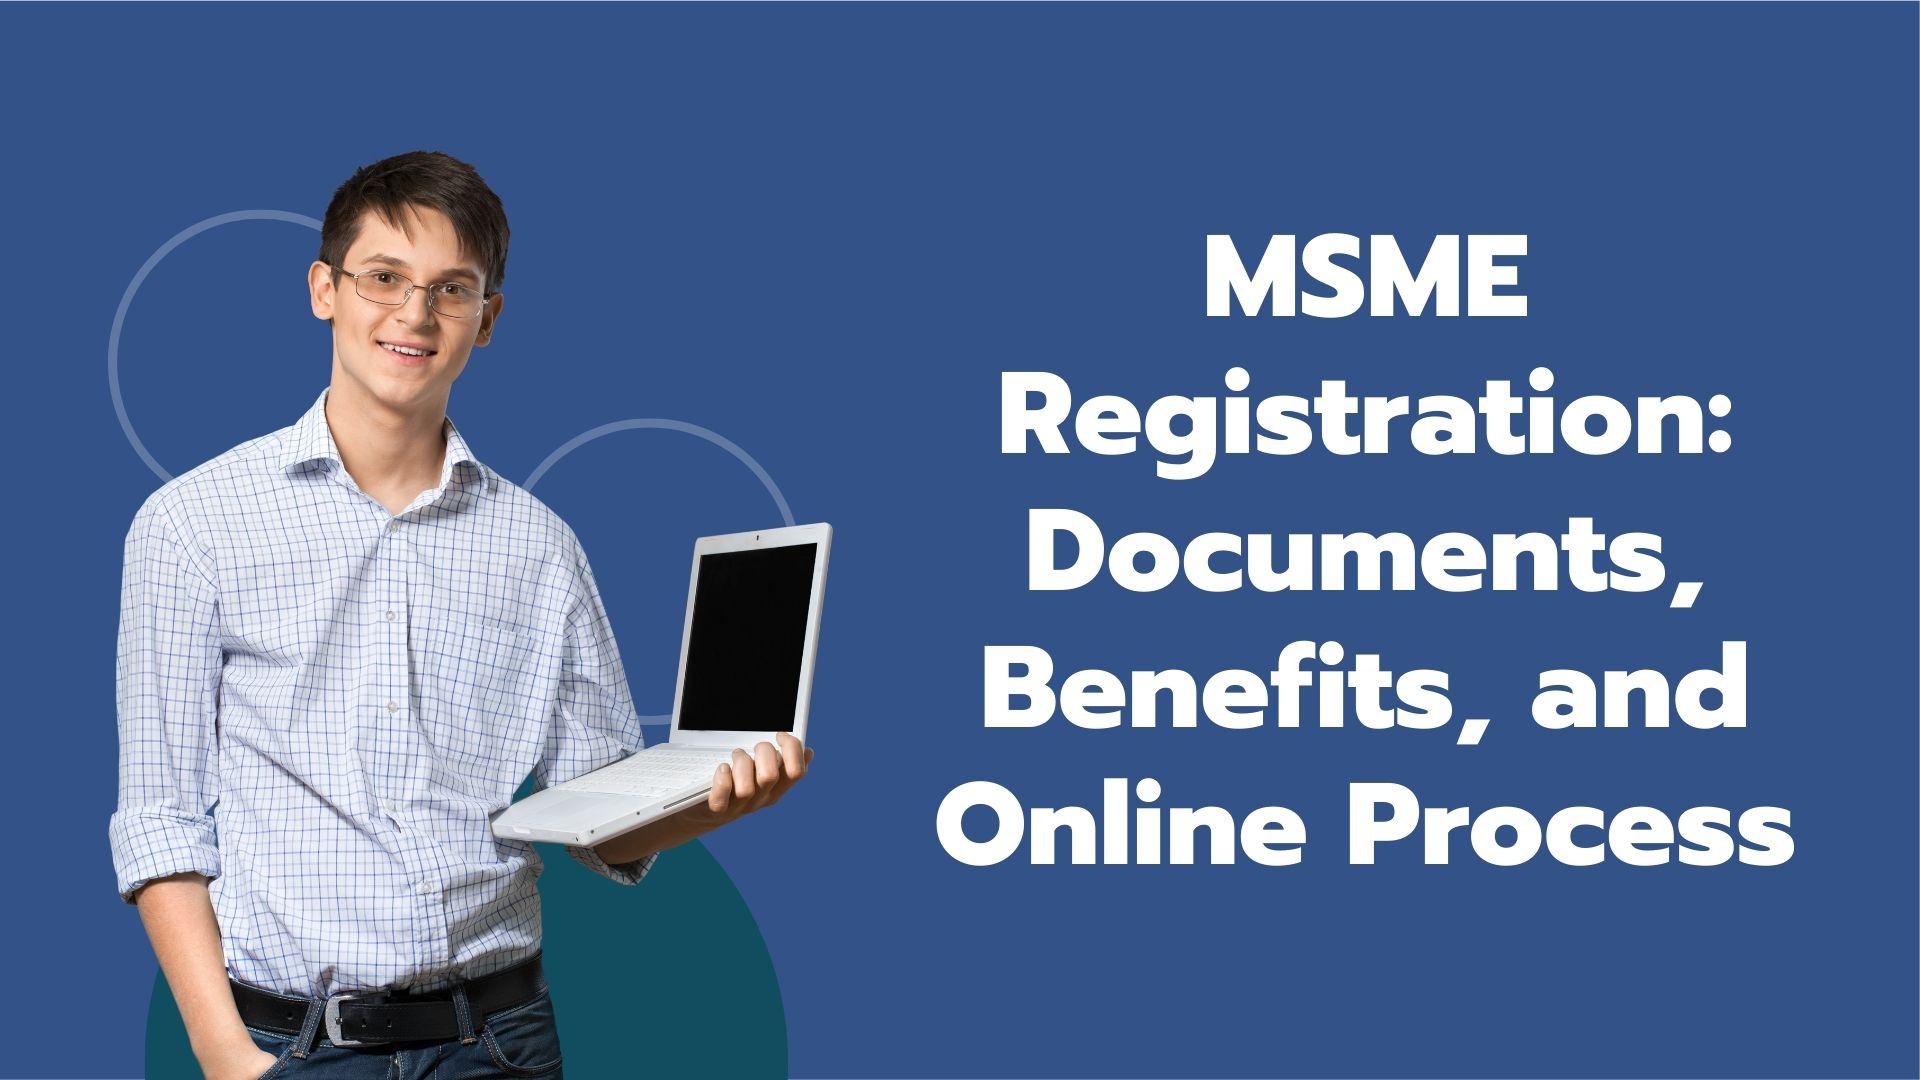 MSME Registration Documents, Benefits, and Online Process